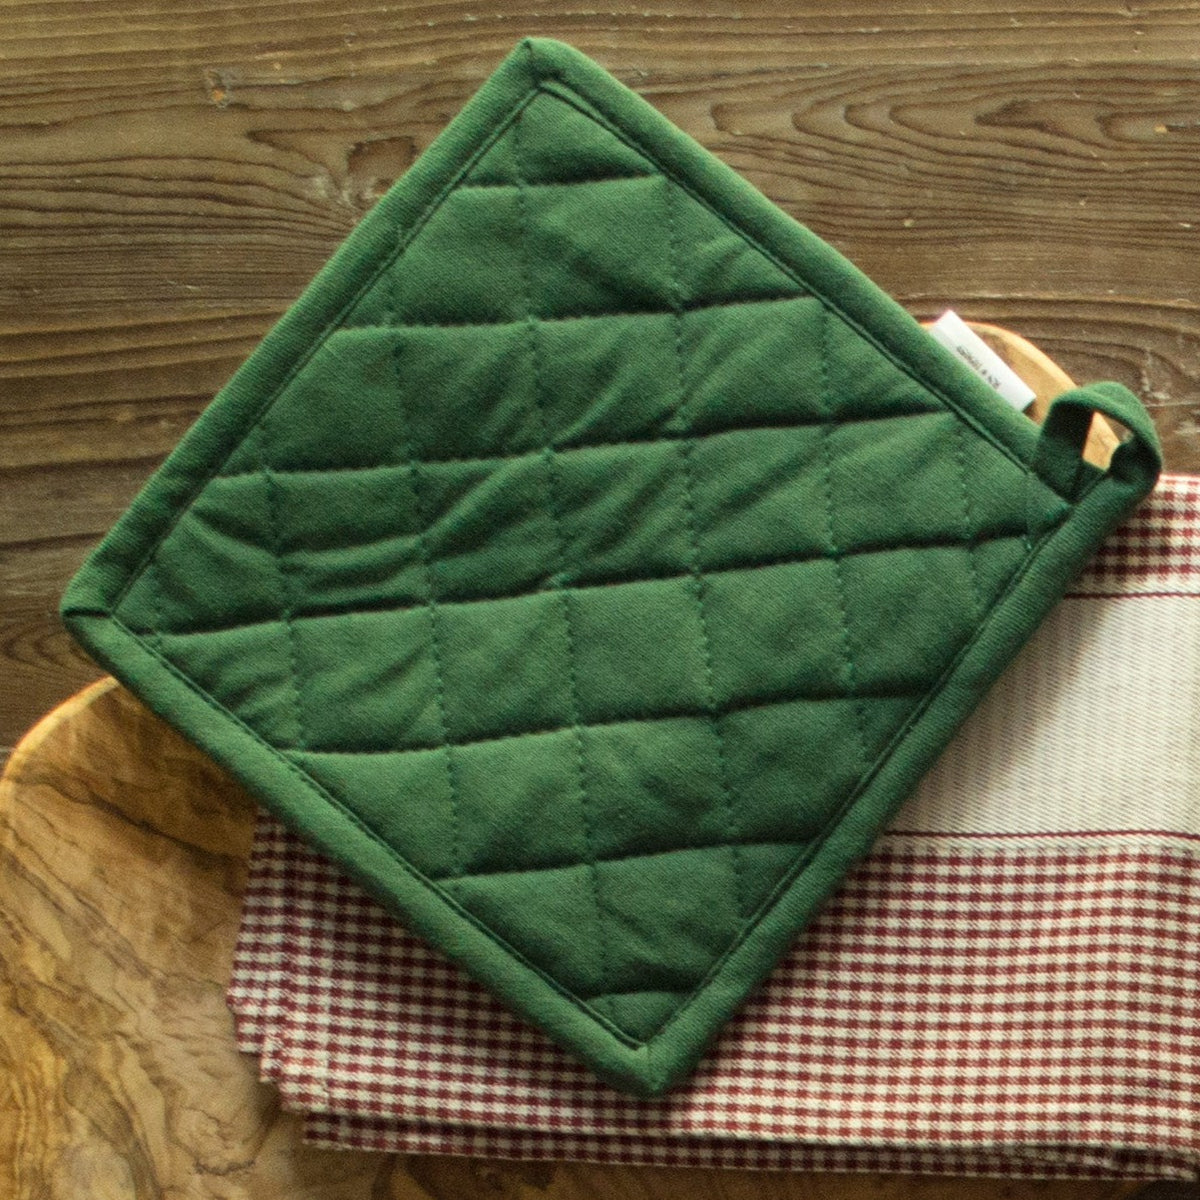 Green 7x7 Hotel Pot Holder Check Pattern all Cotton Yarn dyed